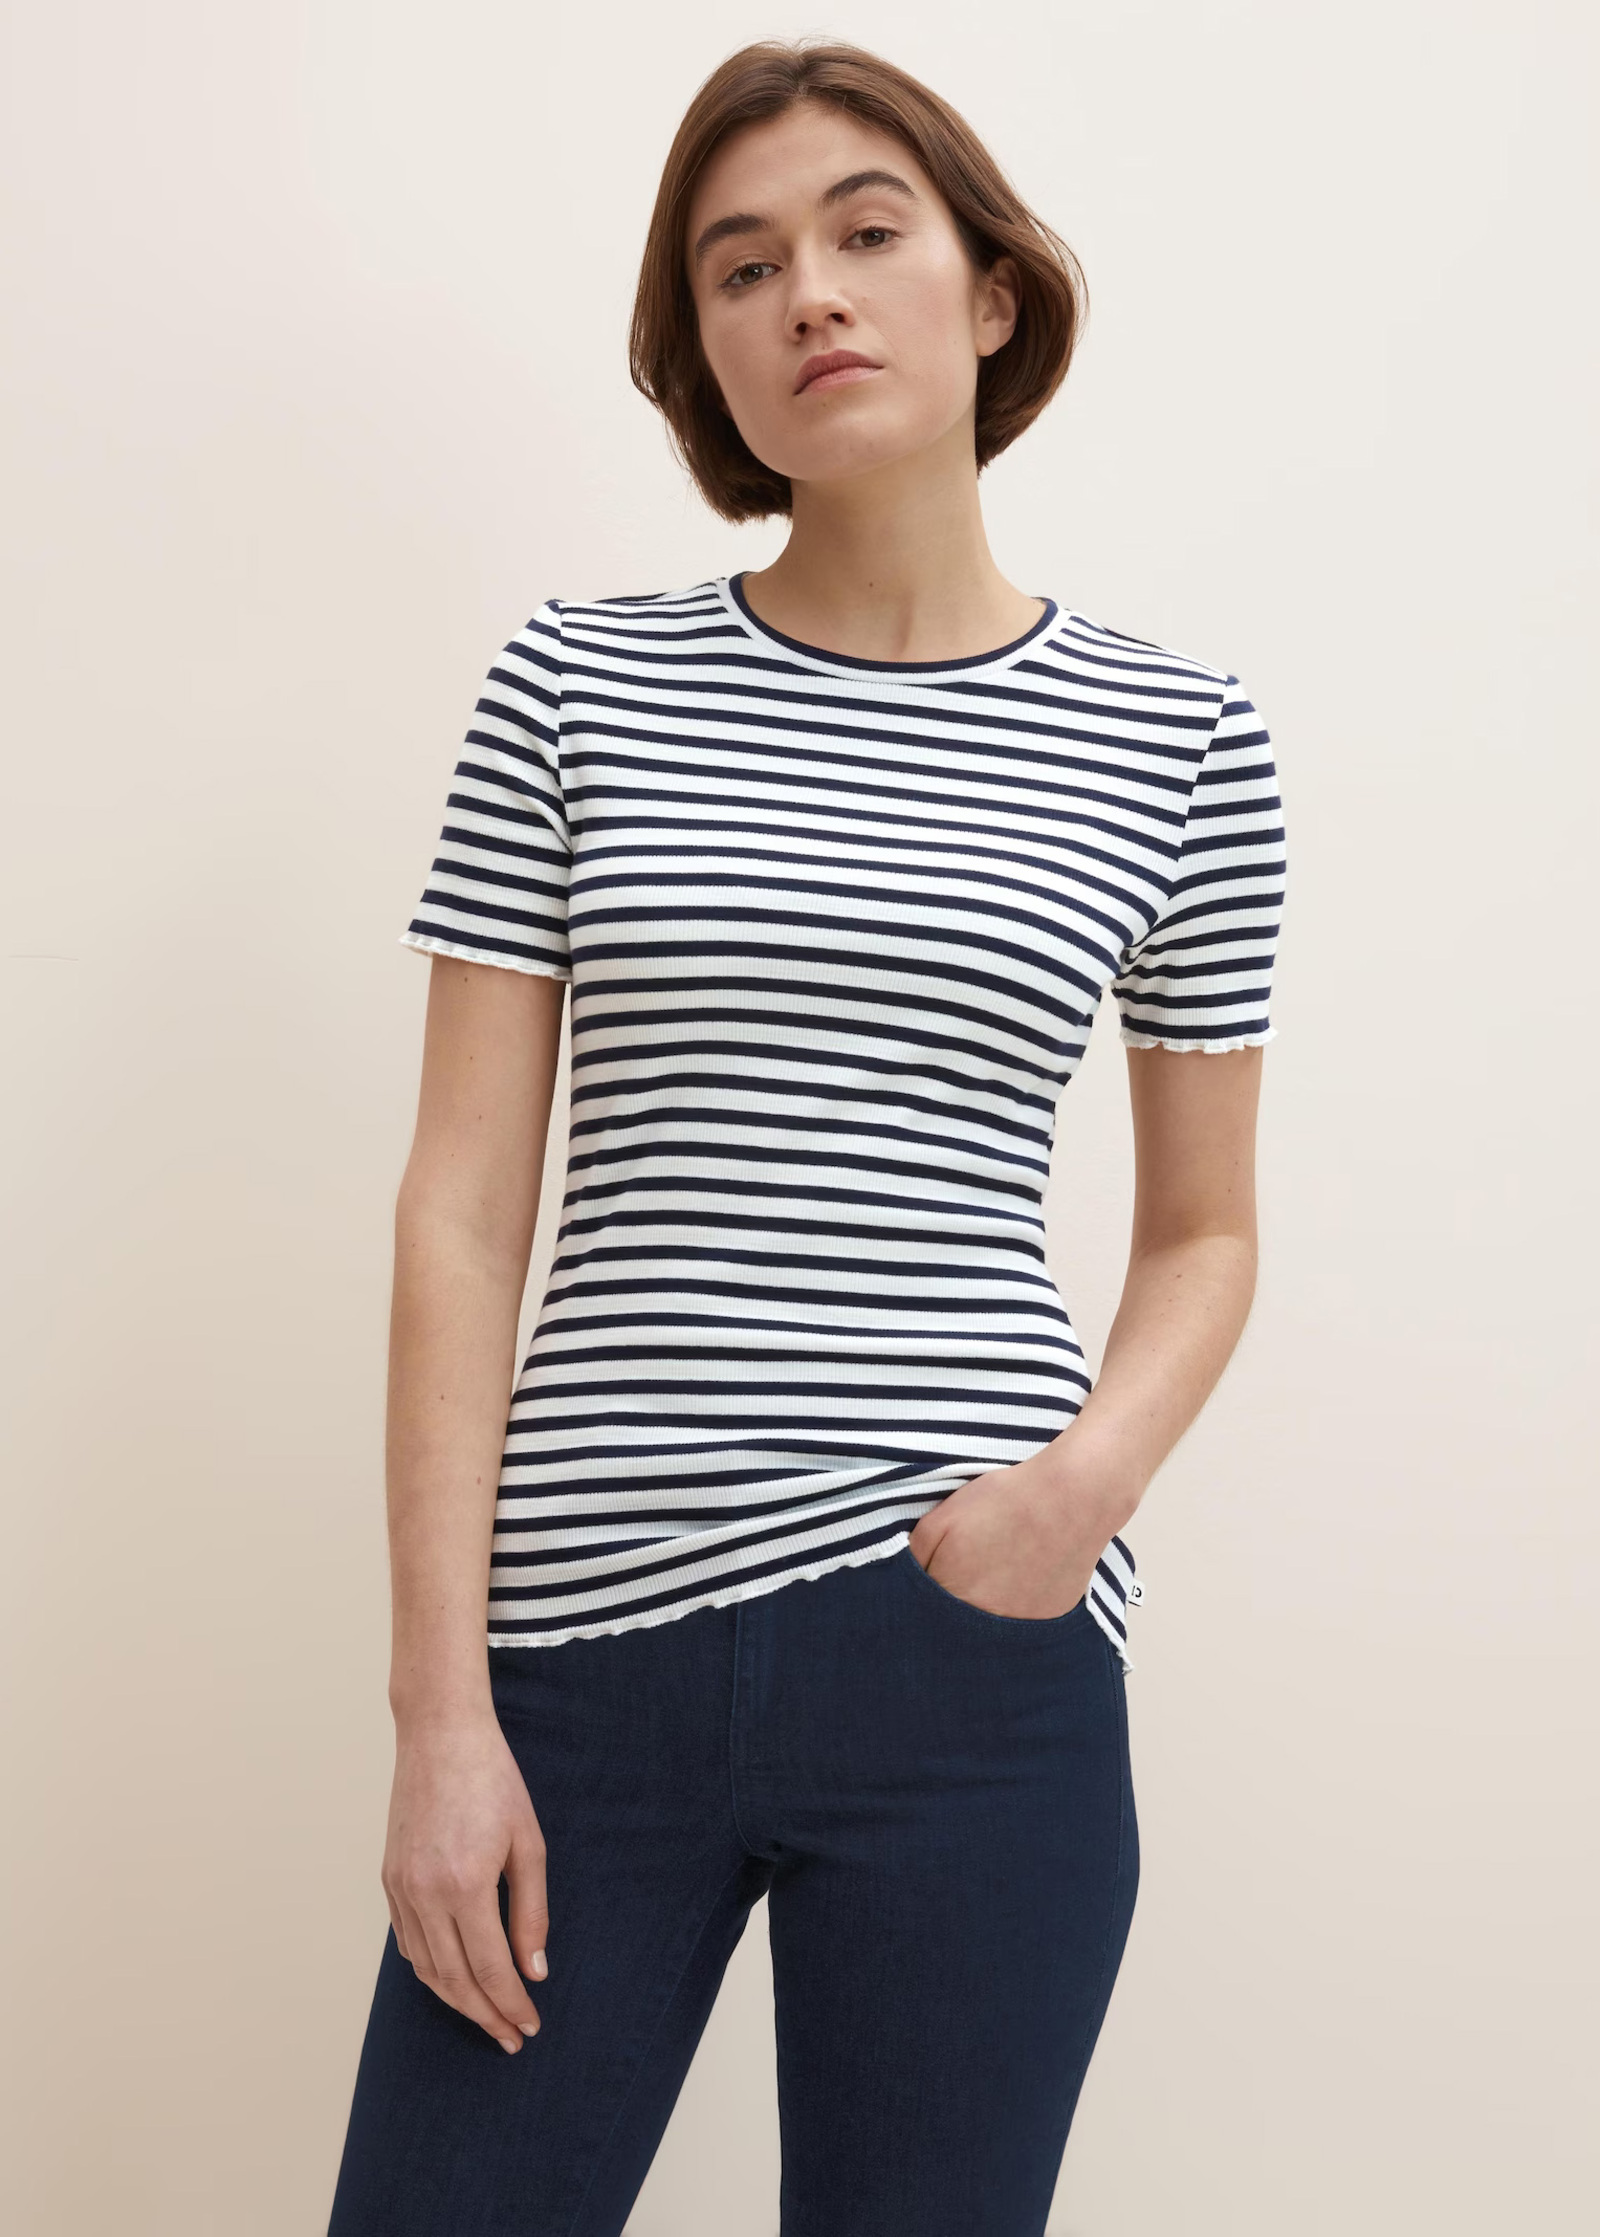 Tom Tailor® Slim fit Stripes White - Stripe t-shirt with M Navy Size